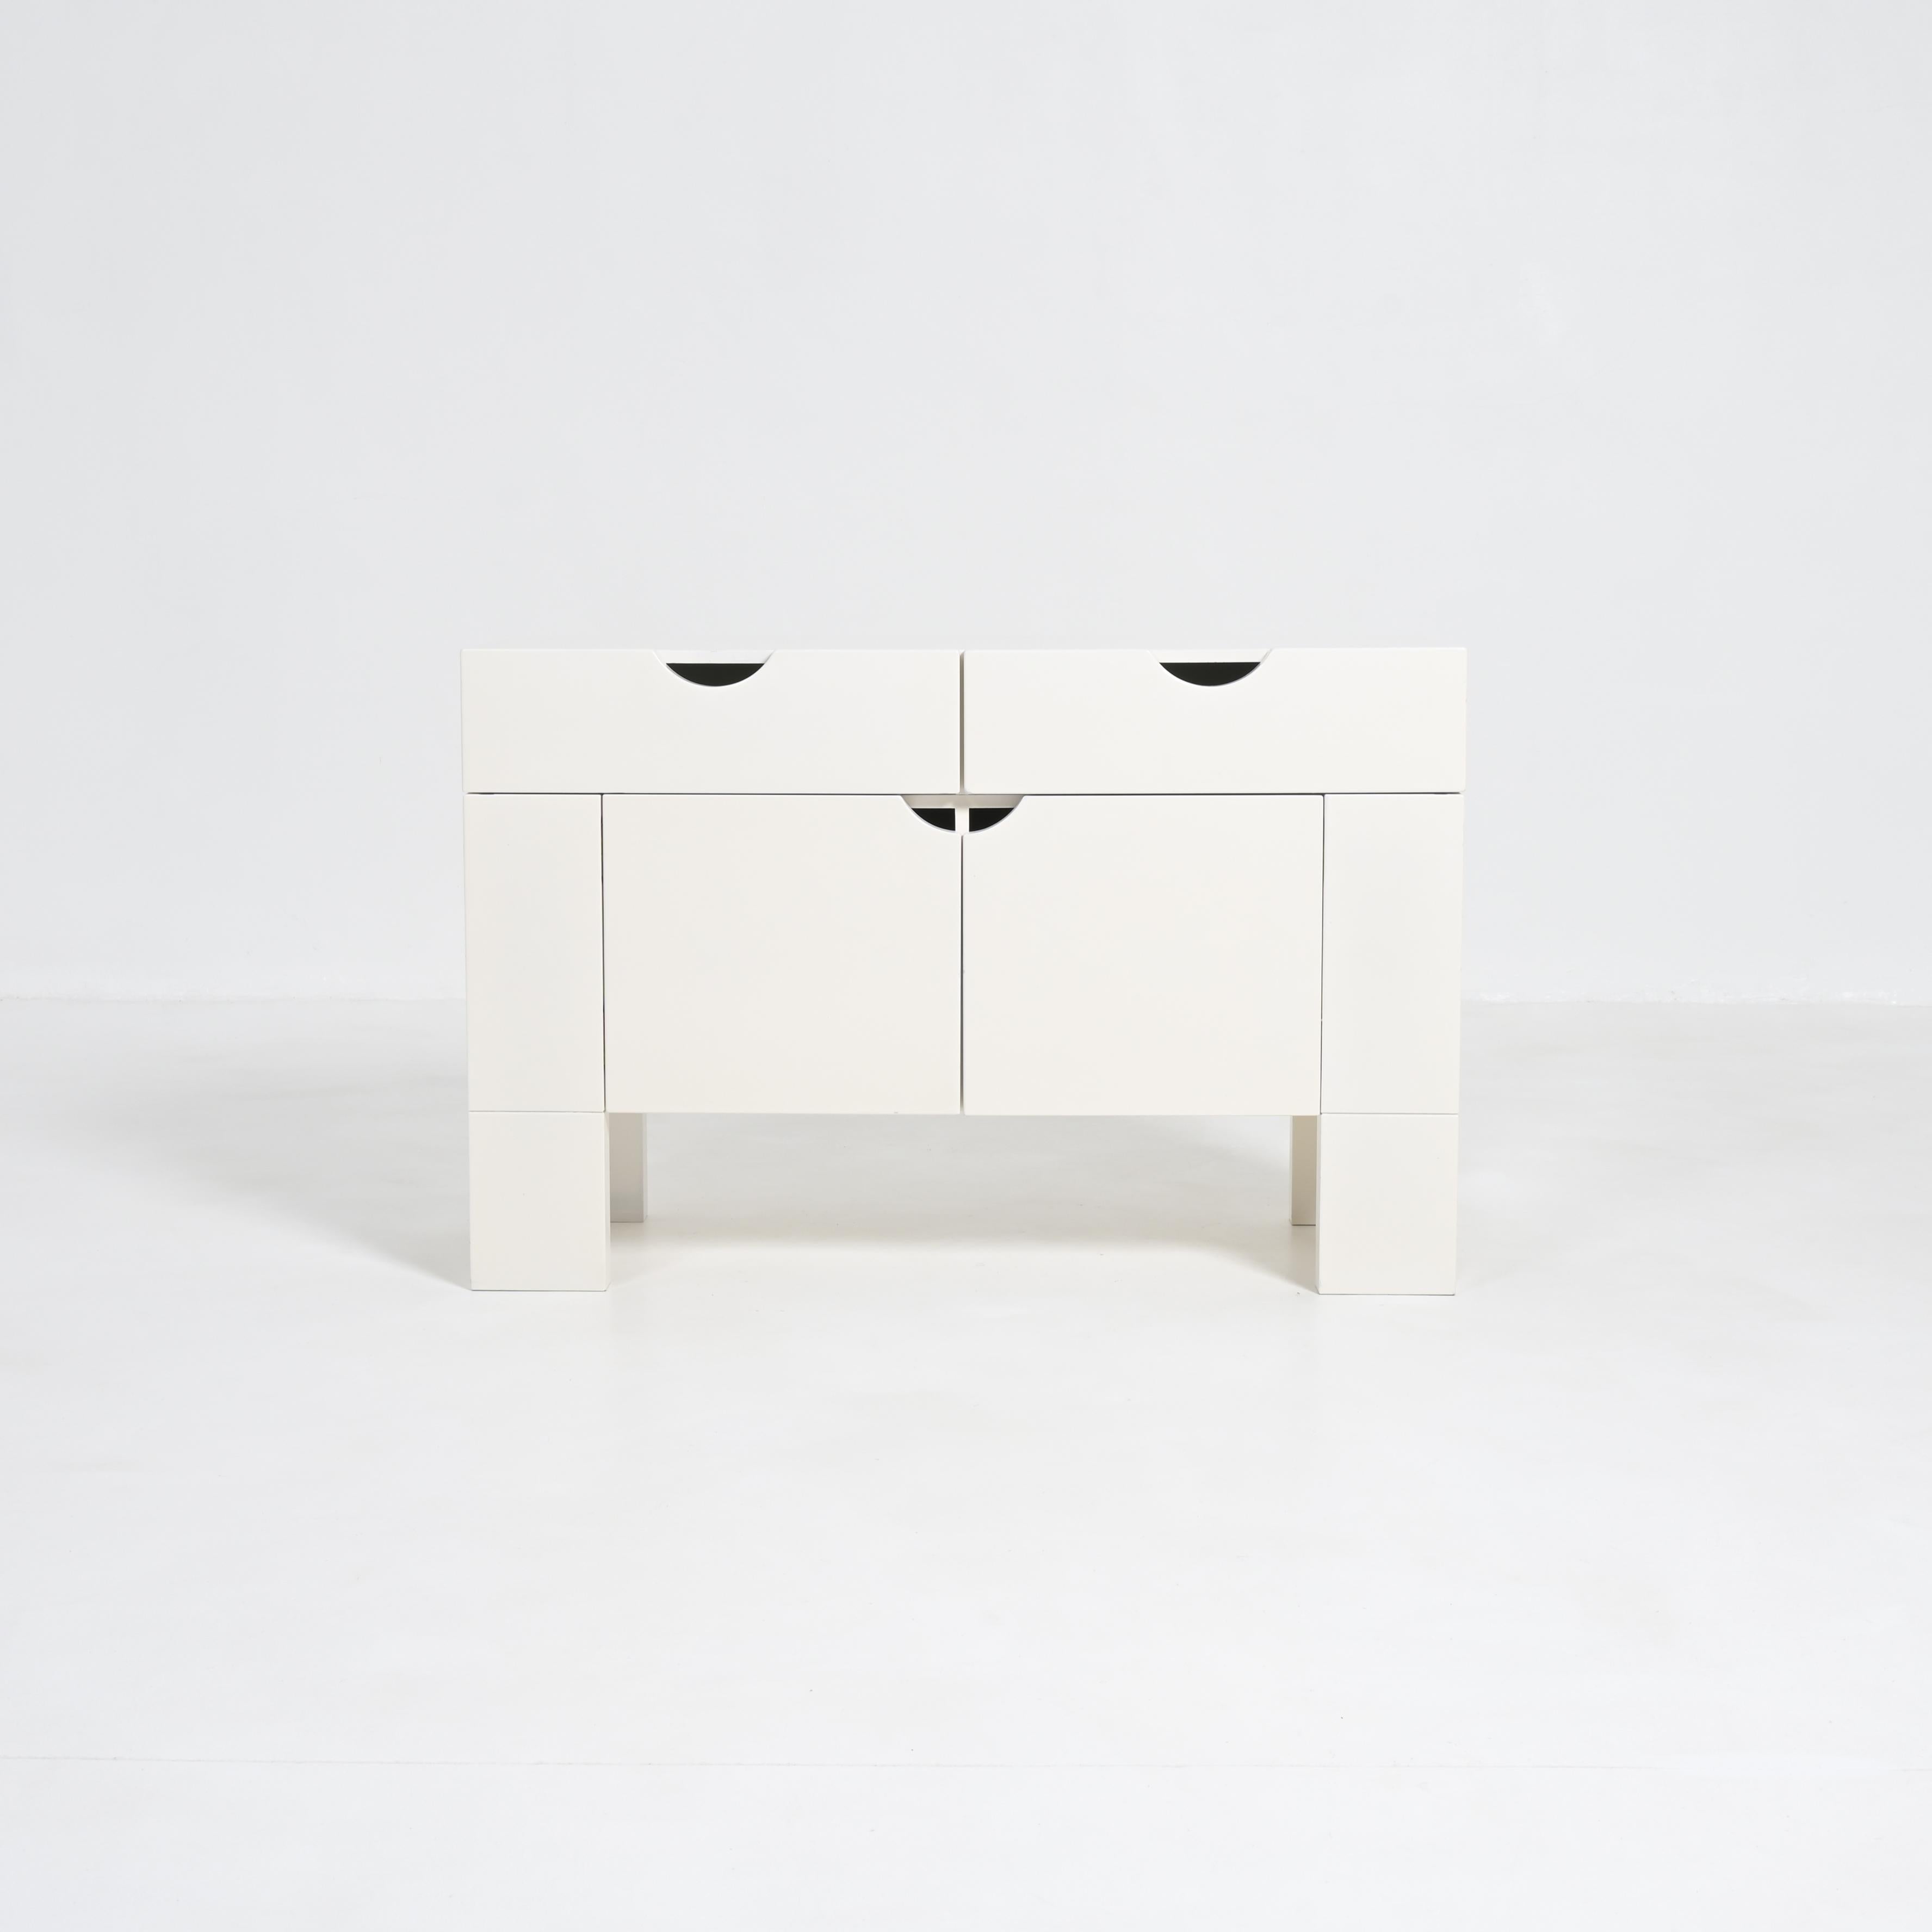 This beautiful cabinet was designed by Claire Bataille and Paul ibens in 1966, for private use.
In 1968 it came in production by ‘t Spectrum and it was only produced until 1974.
This white cabinet in lacquered wood is in very good authentic